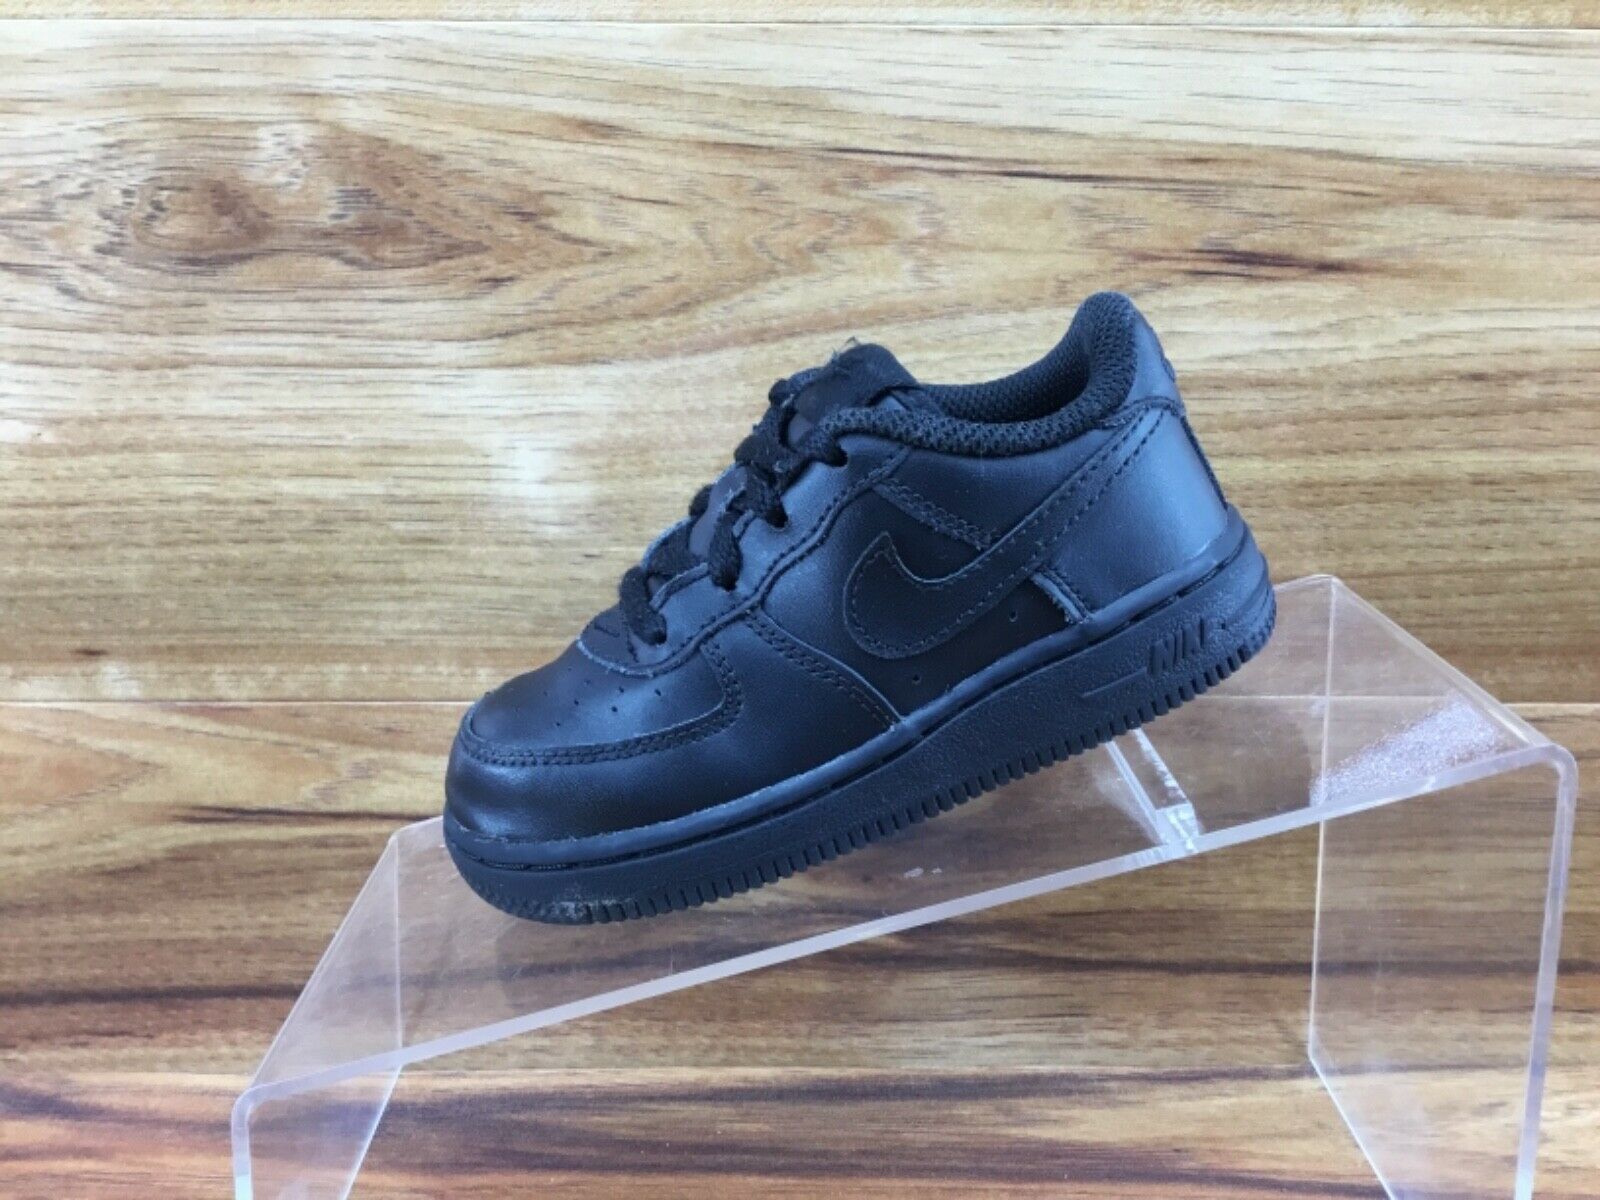 Nike Air Force 1 Baby Infant Triple Black Walking Shoes Toddlers Size 8C